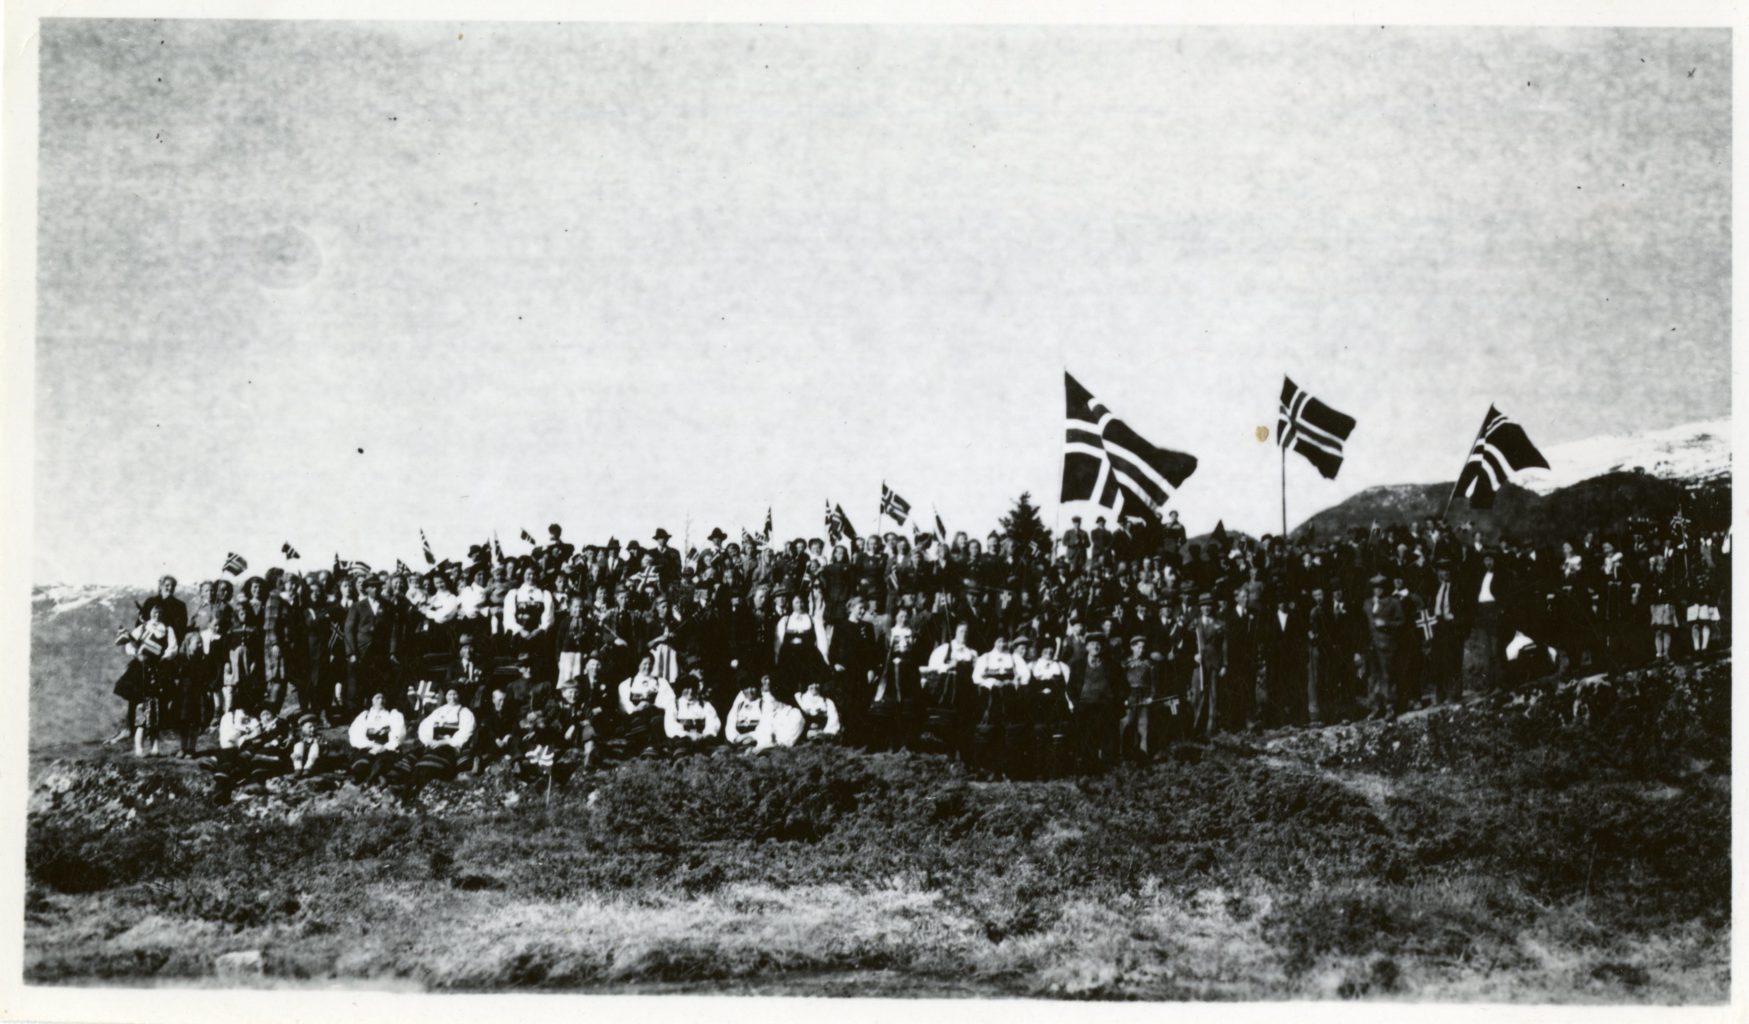 A large crowd of Norwegians in national dress with Norwegian flags flying.